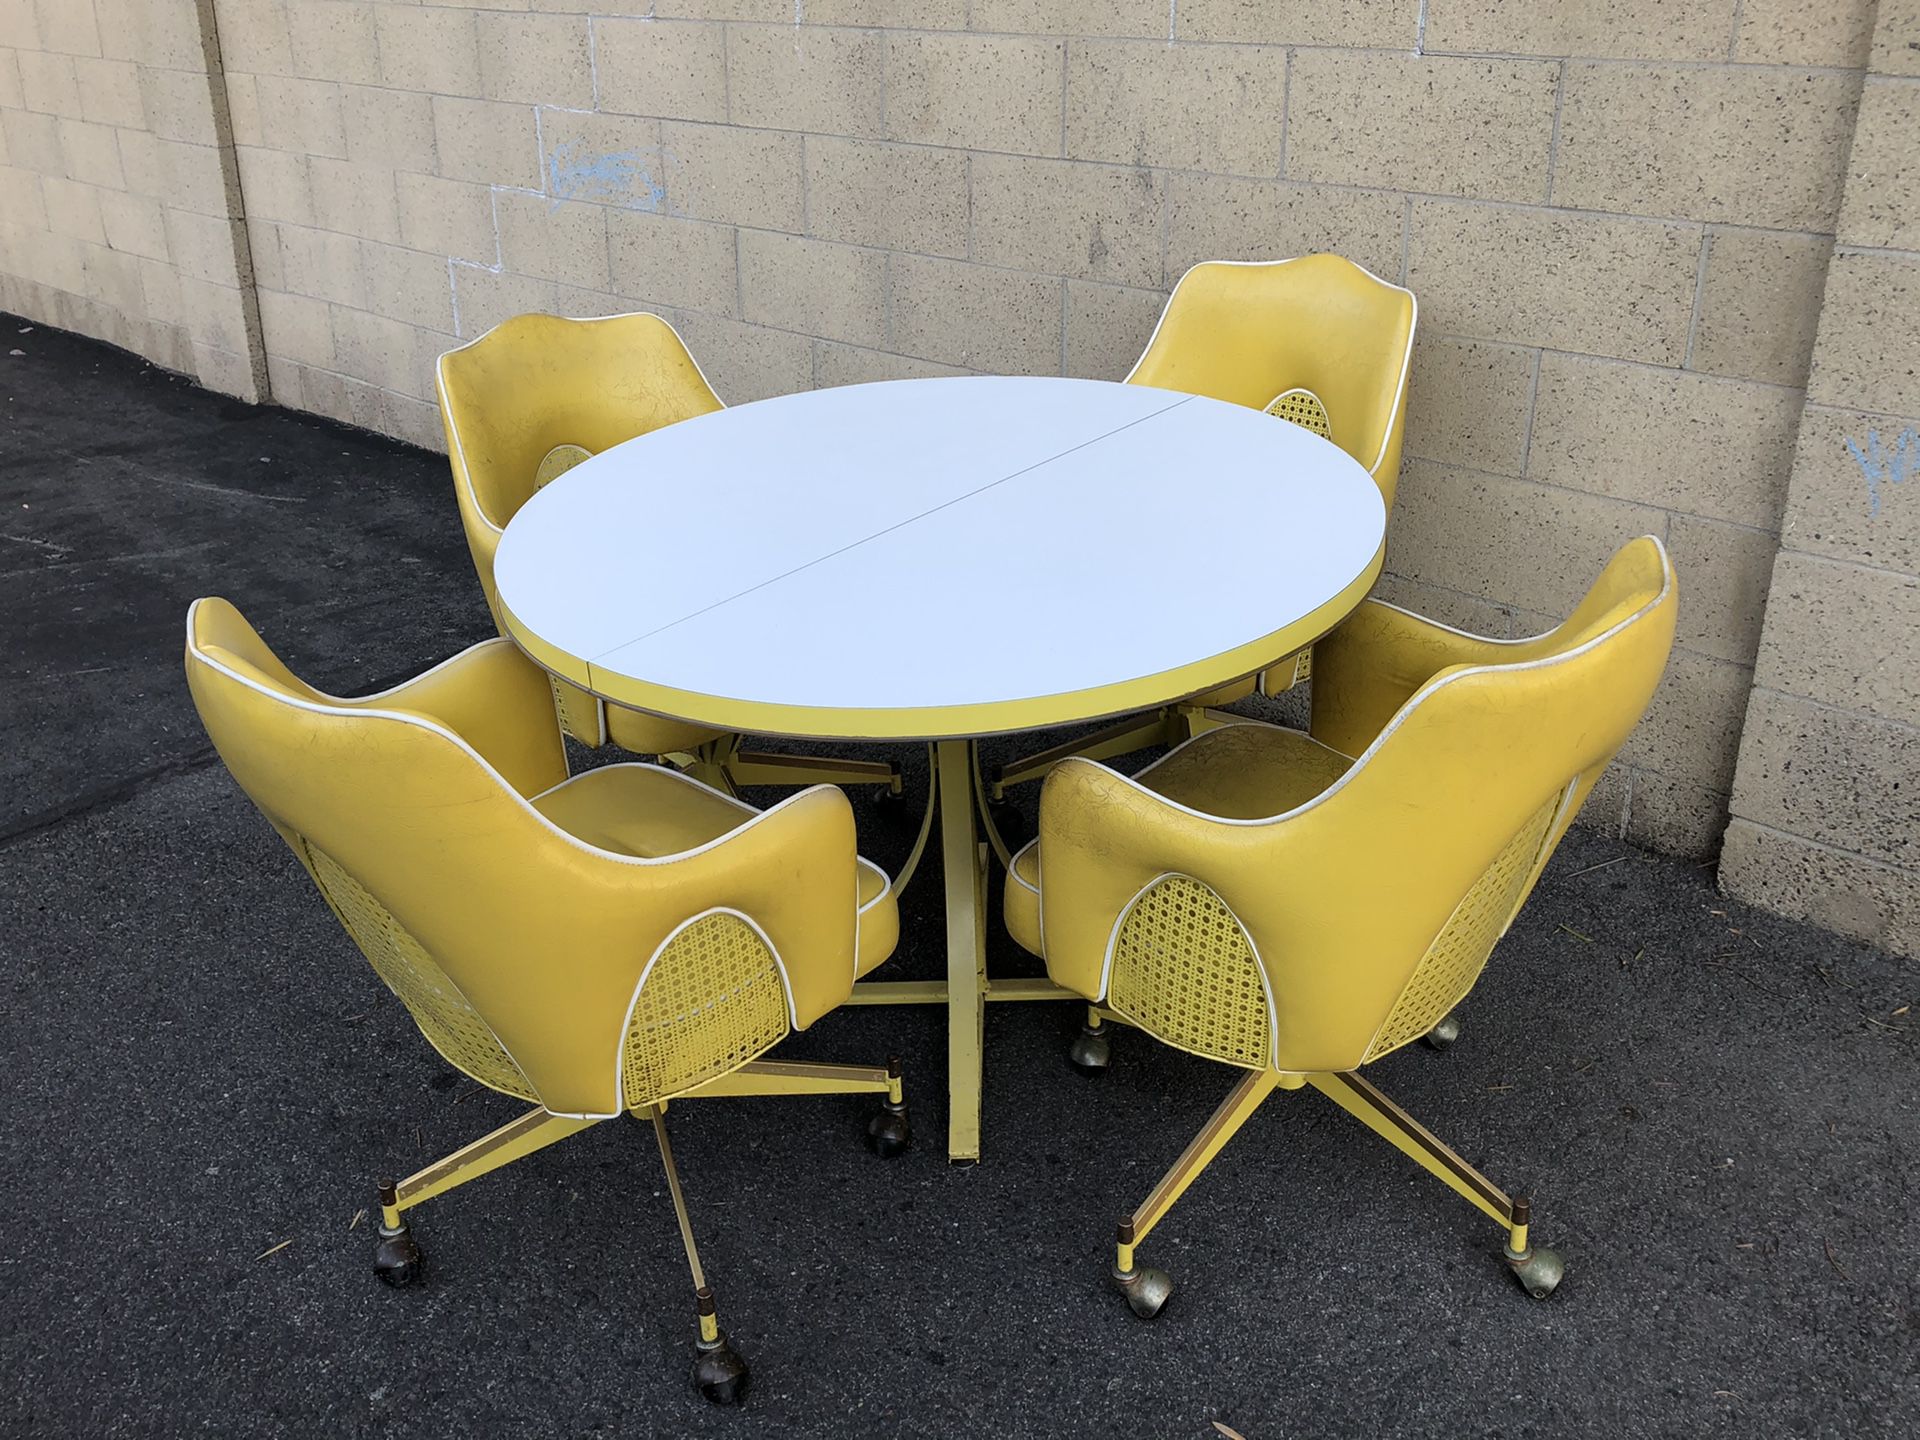 Vintage yellow Watertown dinette/game table 4 chairs